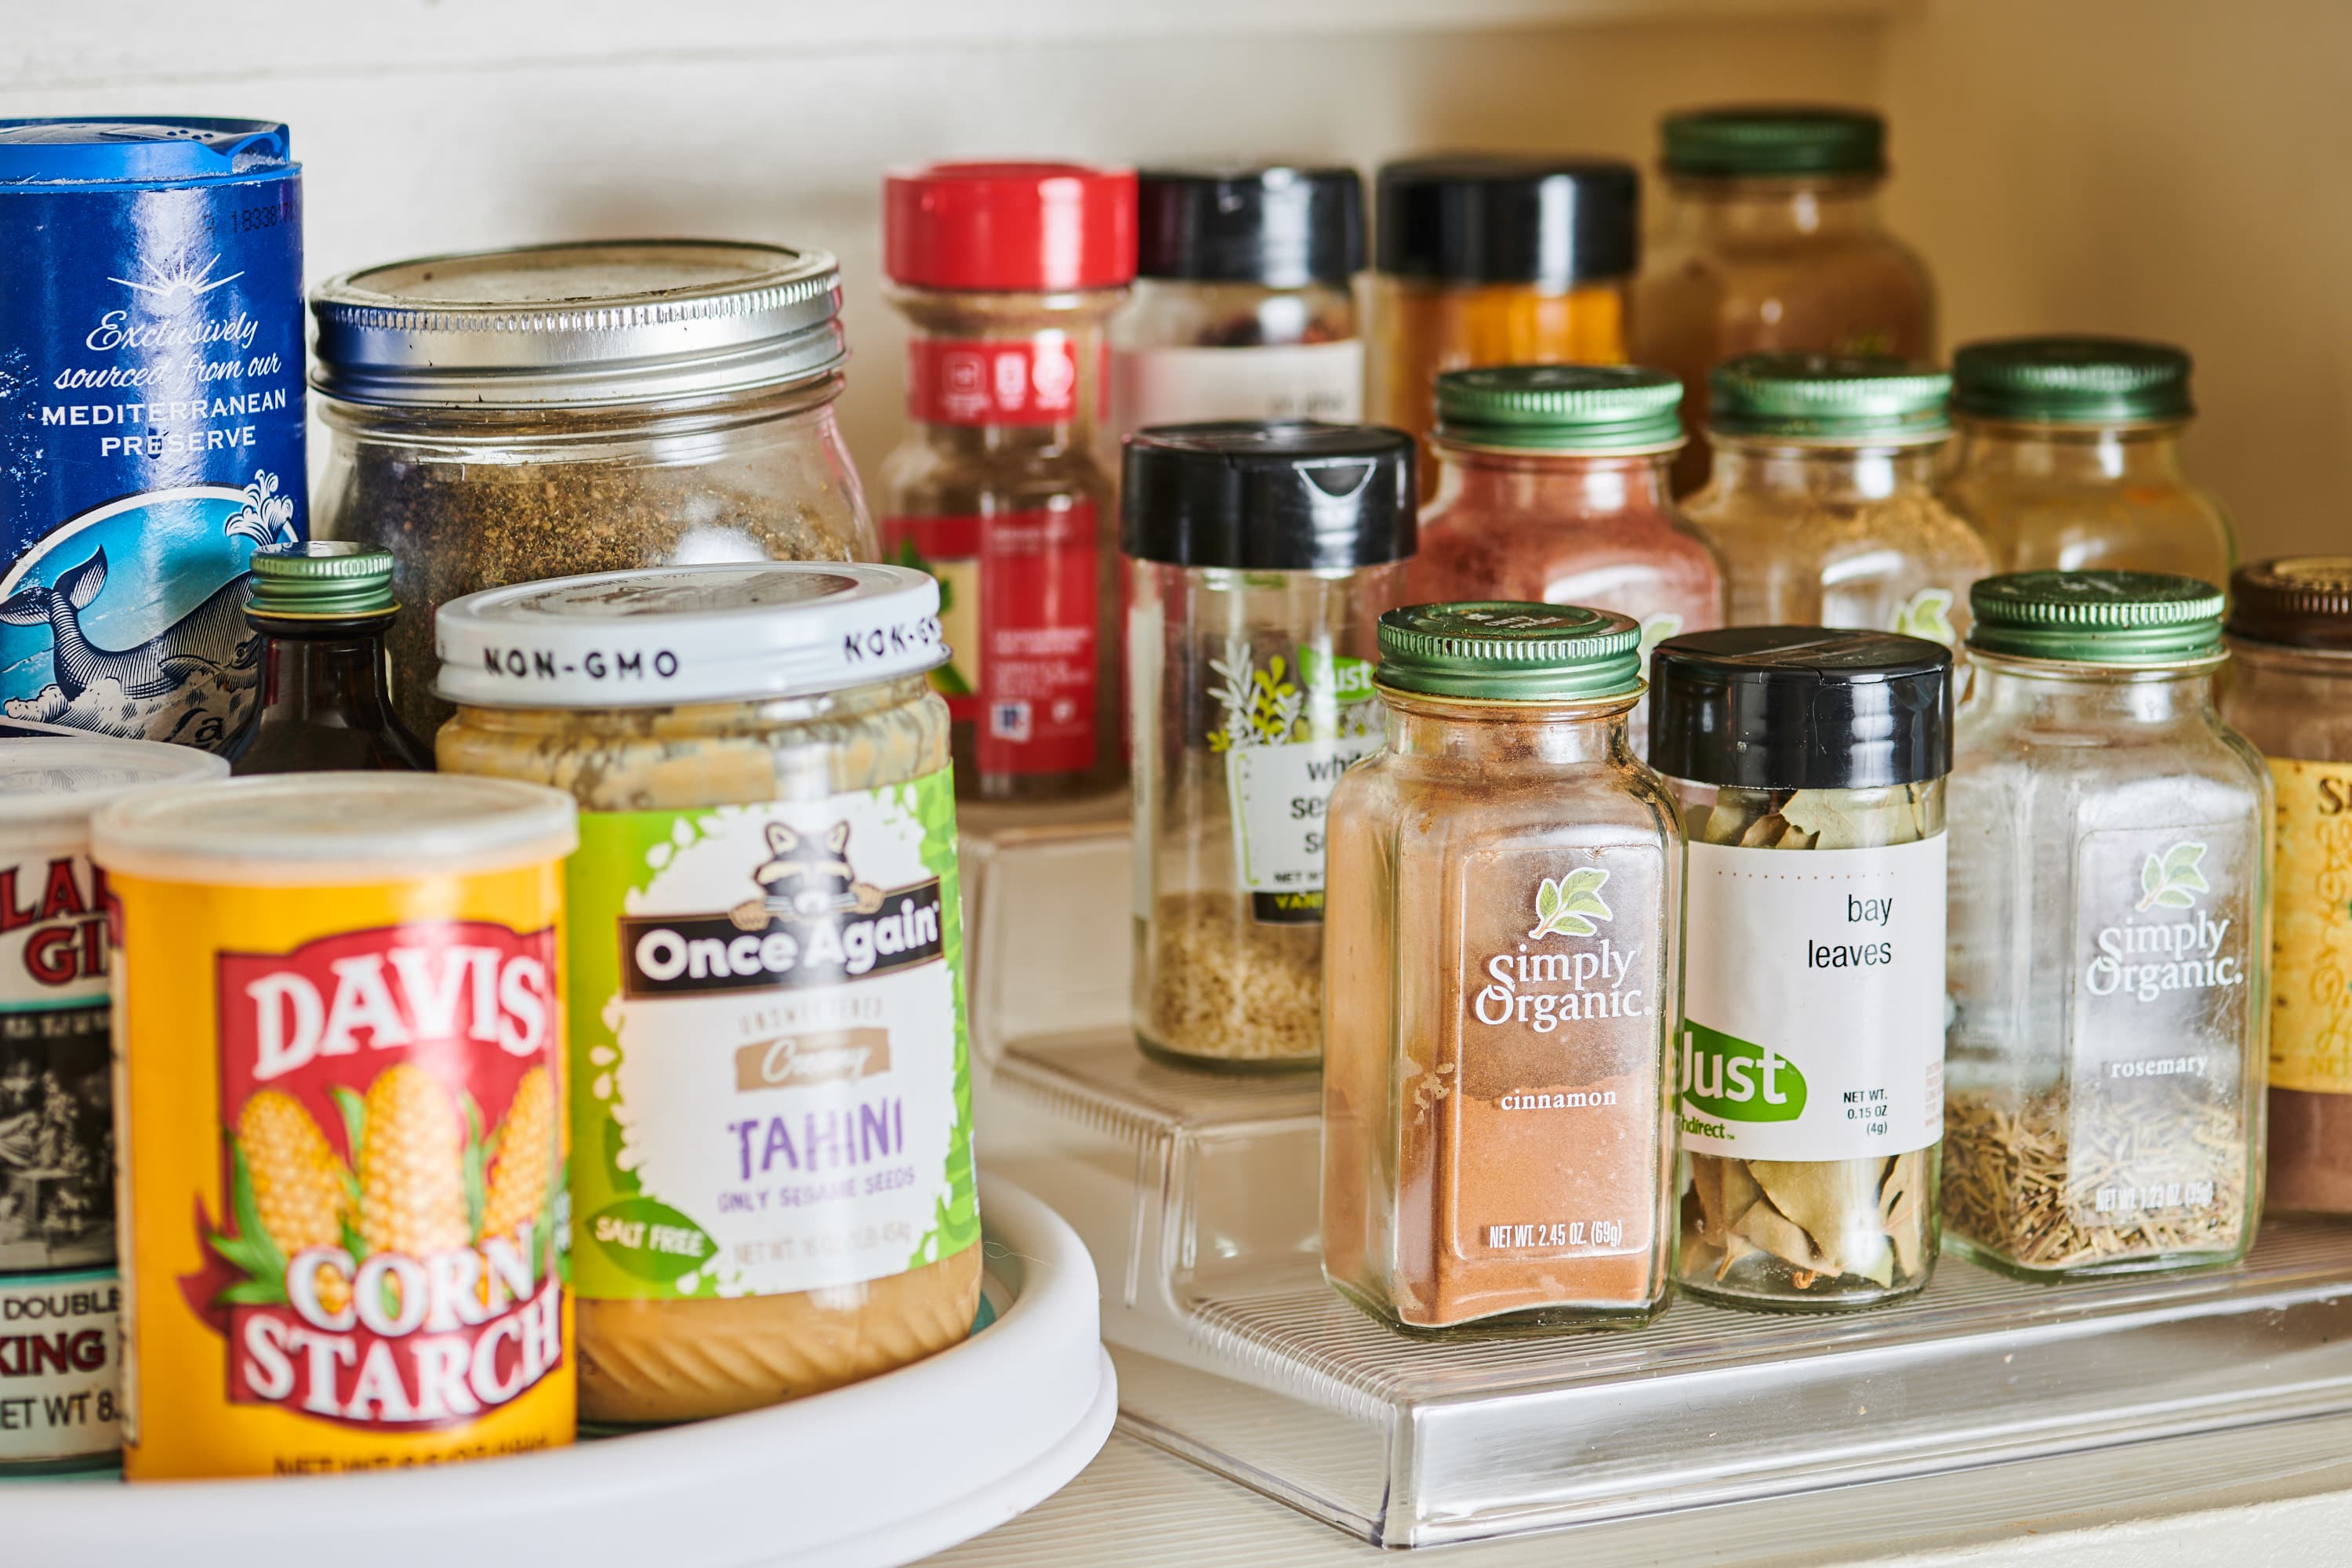 Cleaning and Repurposing Spice Jars - The Links Site